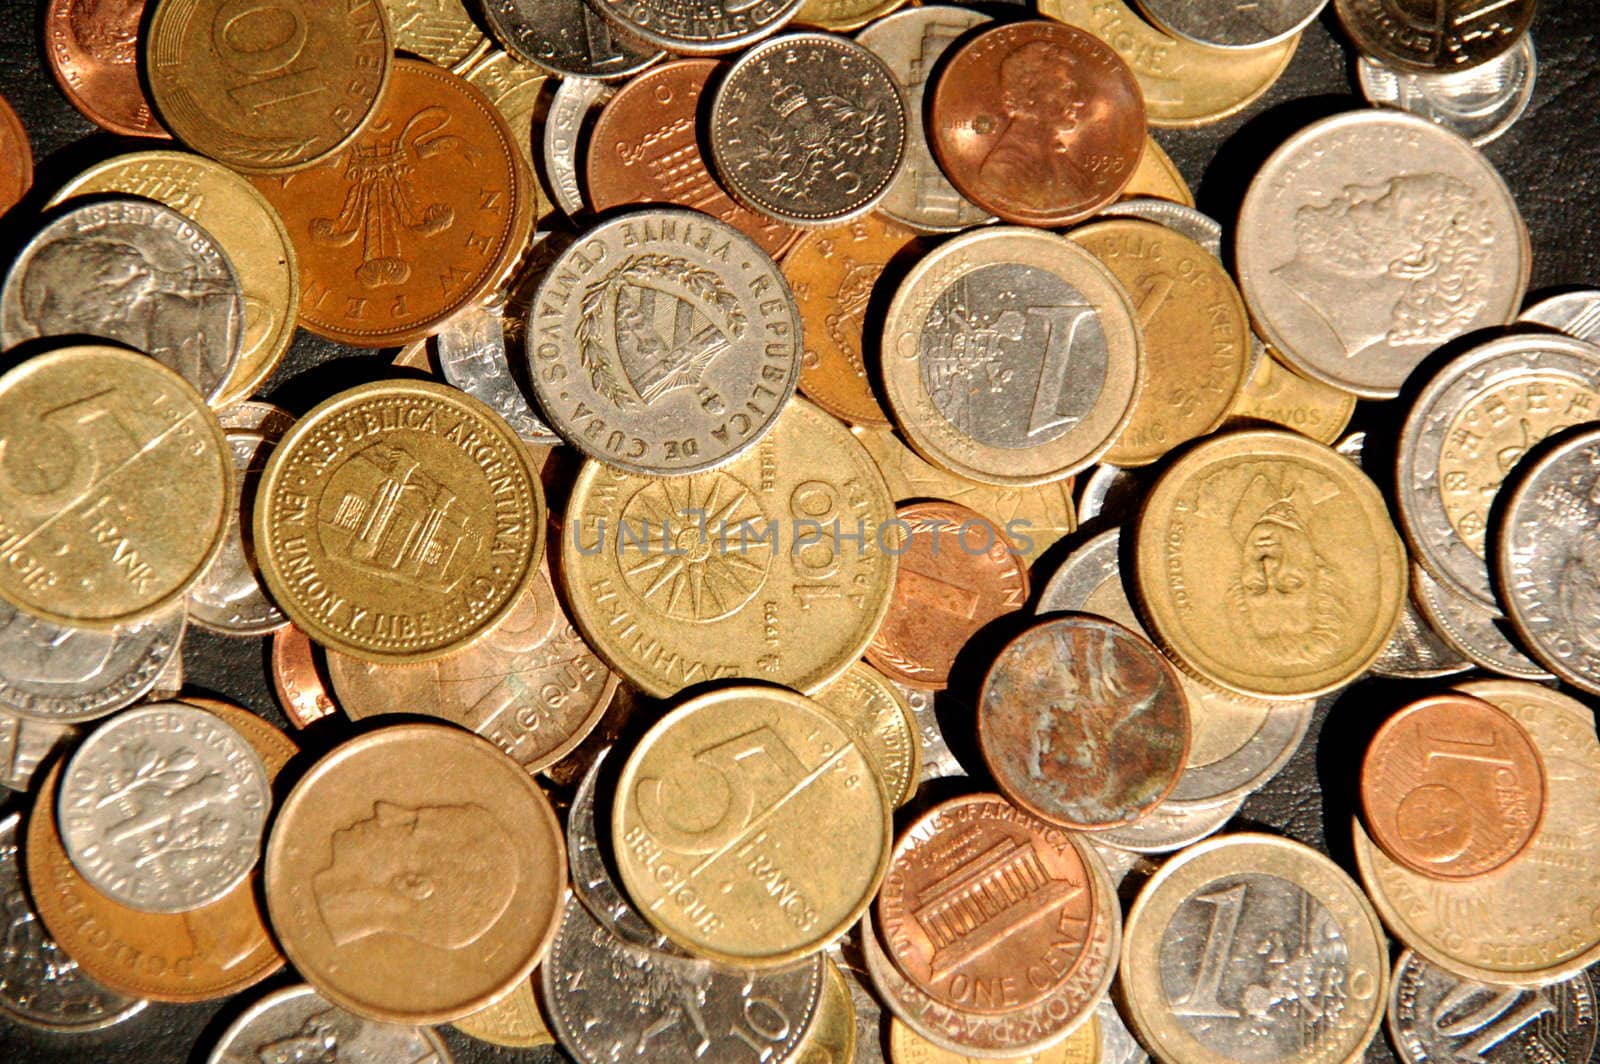 Coins from around the world